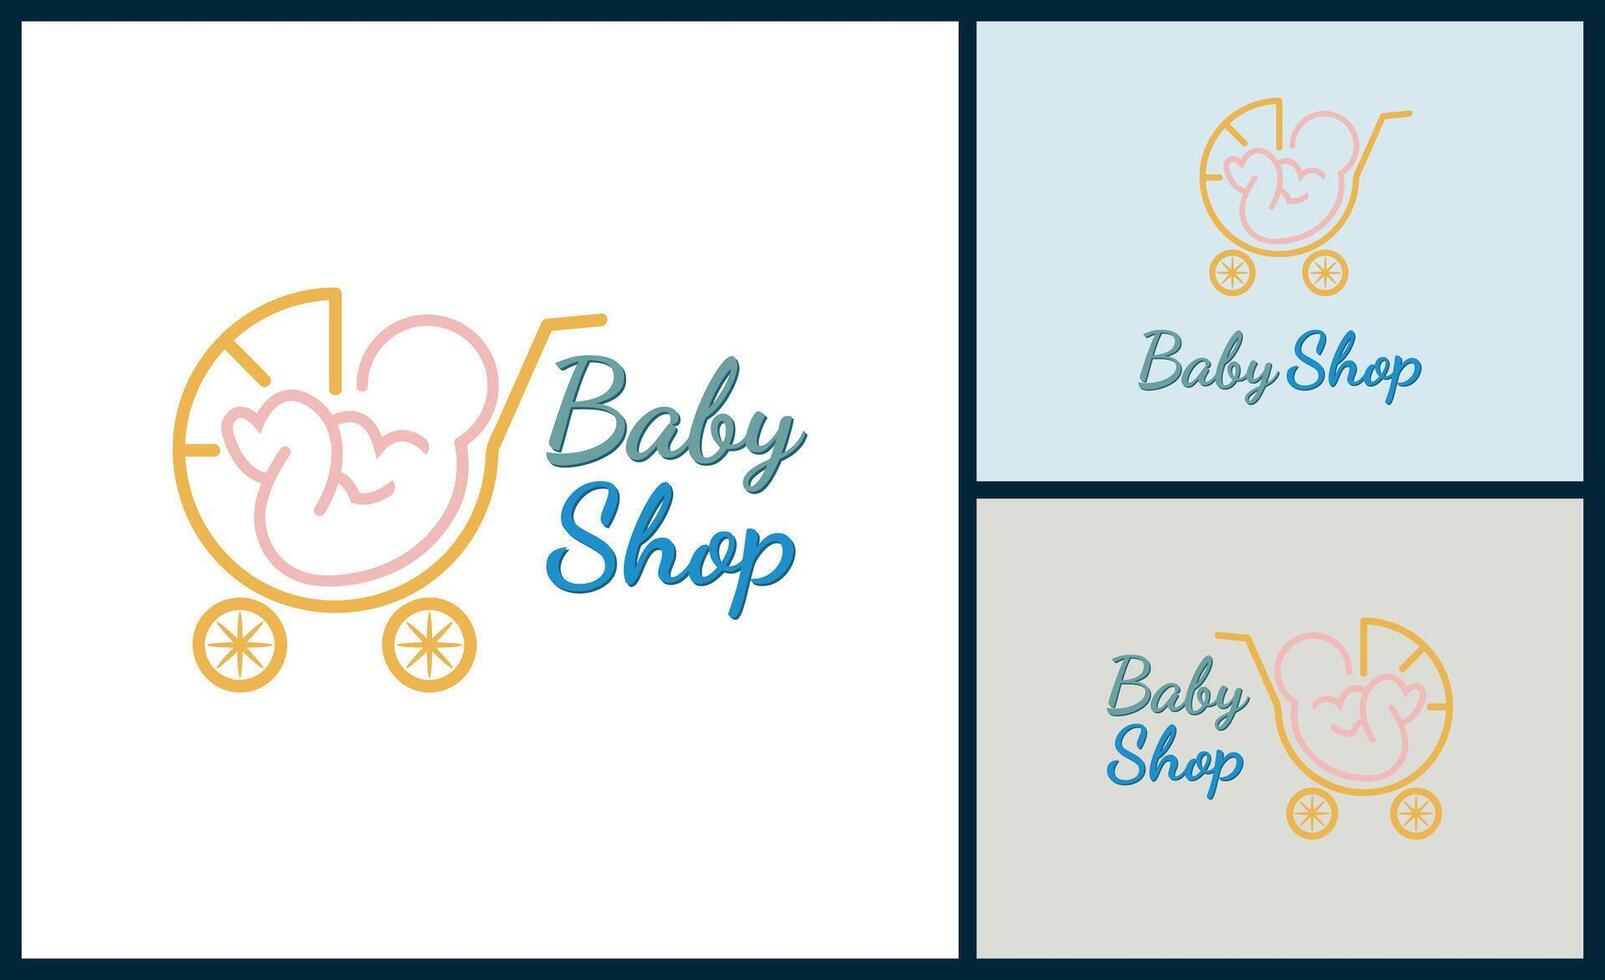 Baby shop cart shopping line style logo design template for brand or company and other vector